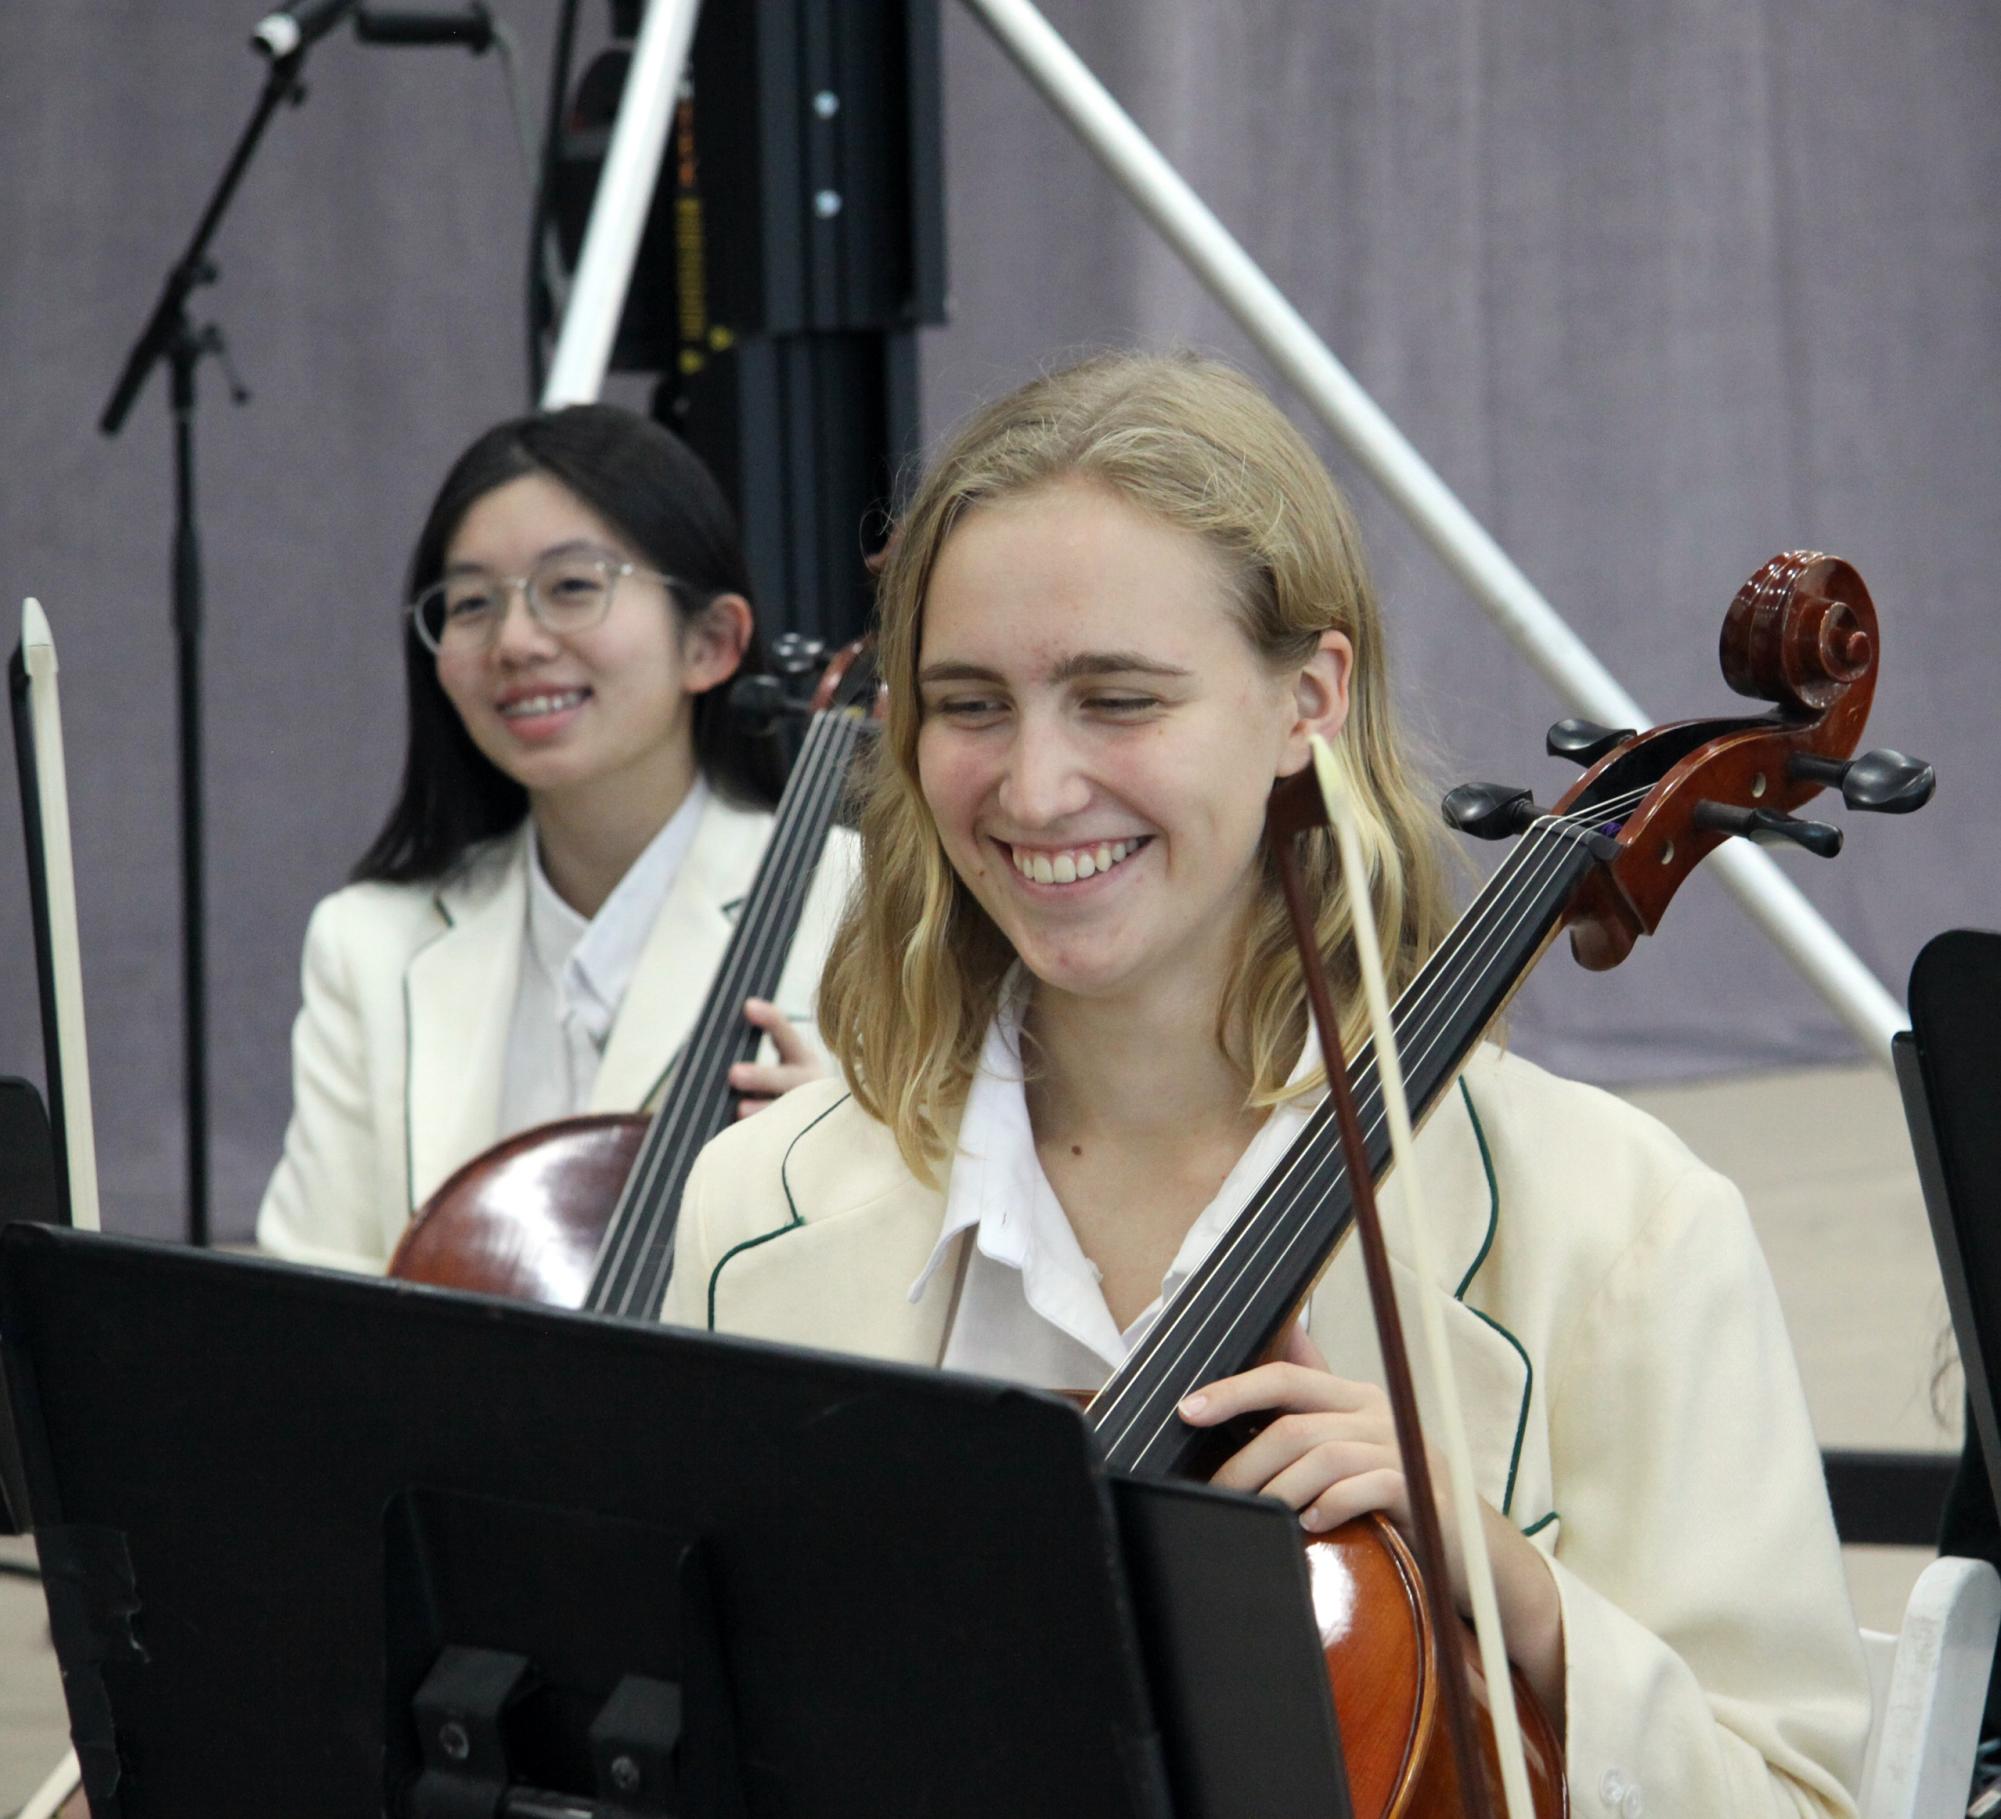 Senior orchestra performers beam after a successful performance at Augusts convocation ceremony.